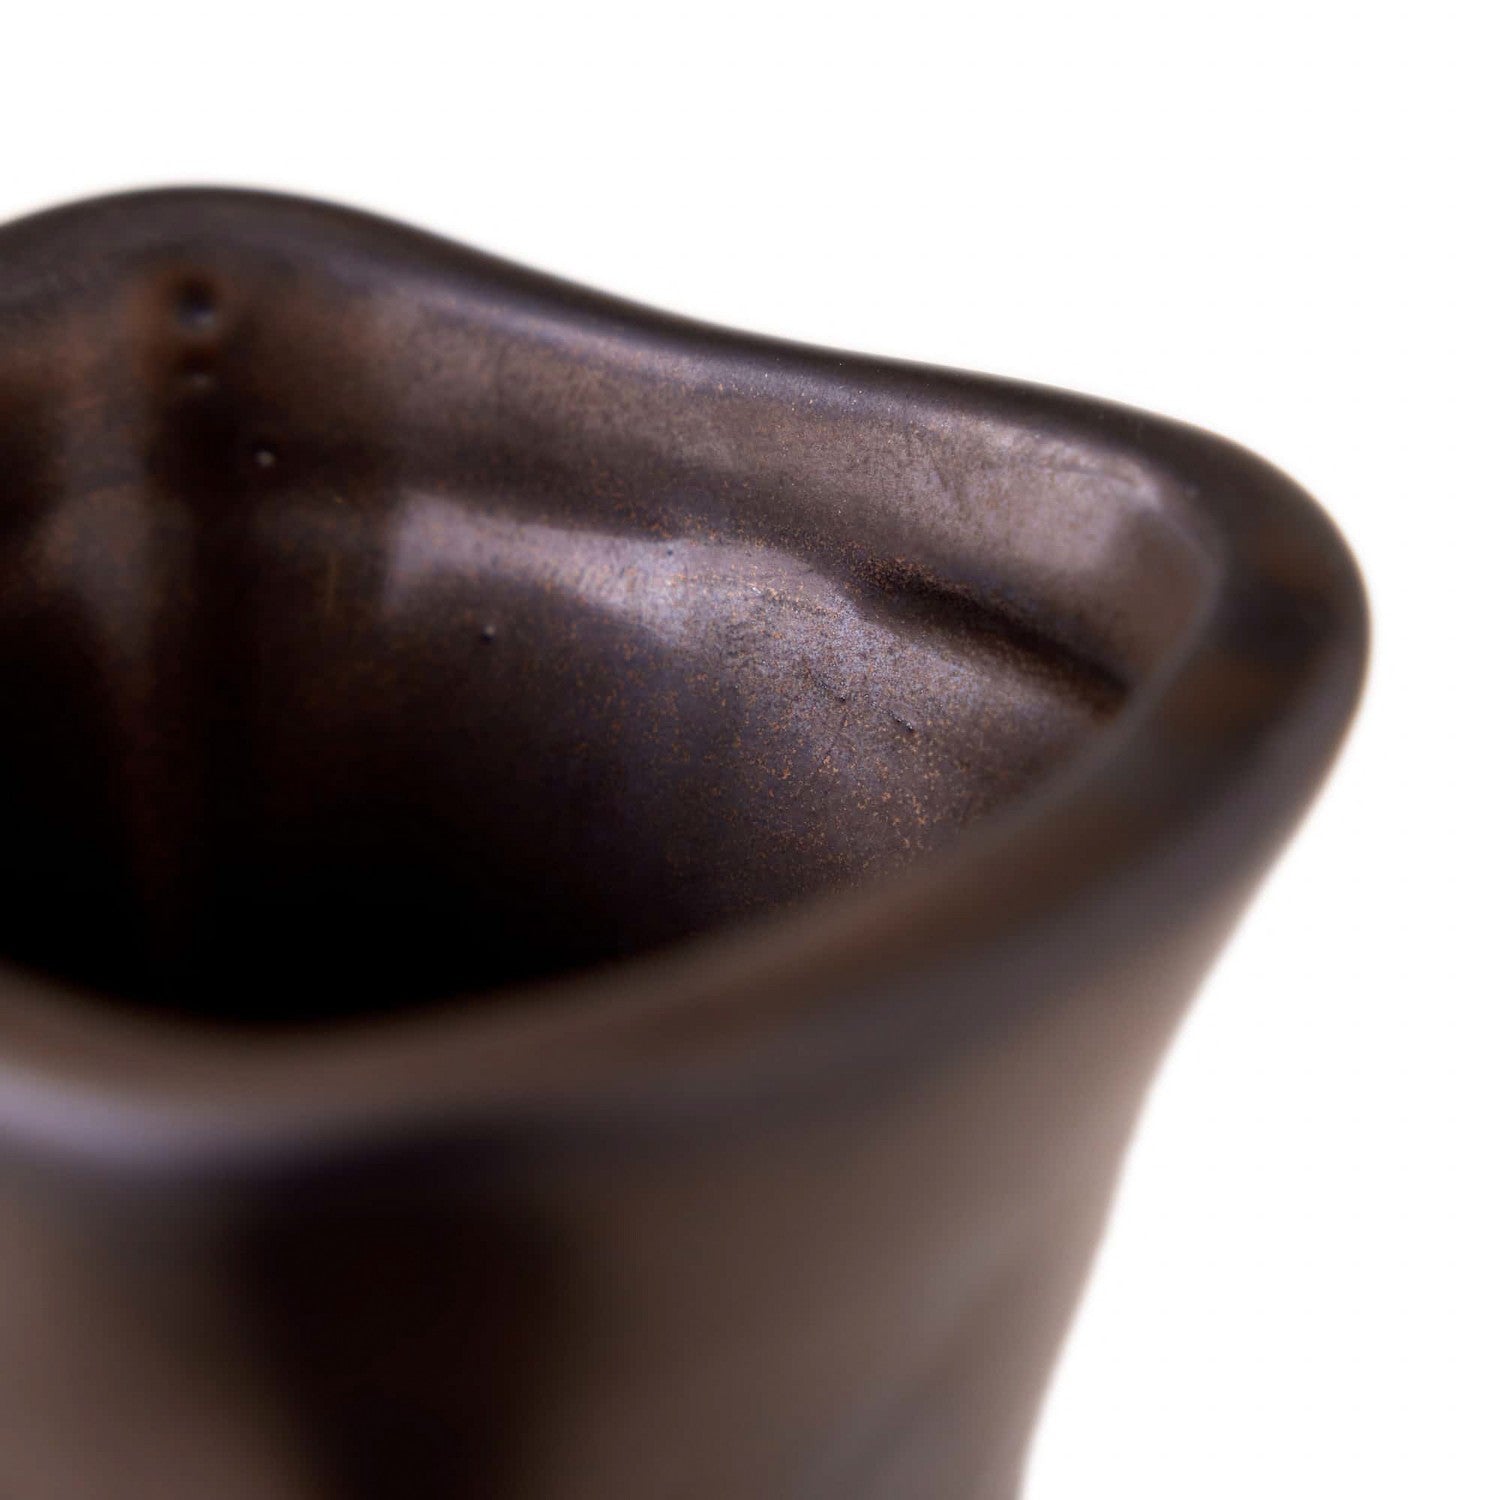 Vase from the Tilbury collection in Gunmetal finish